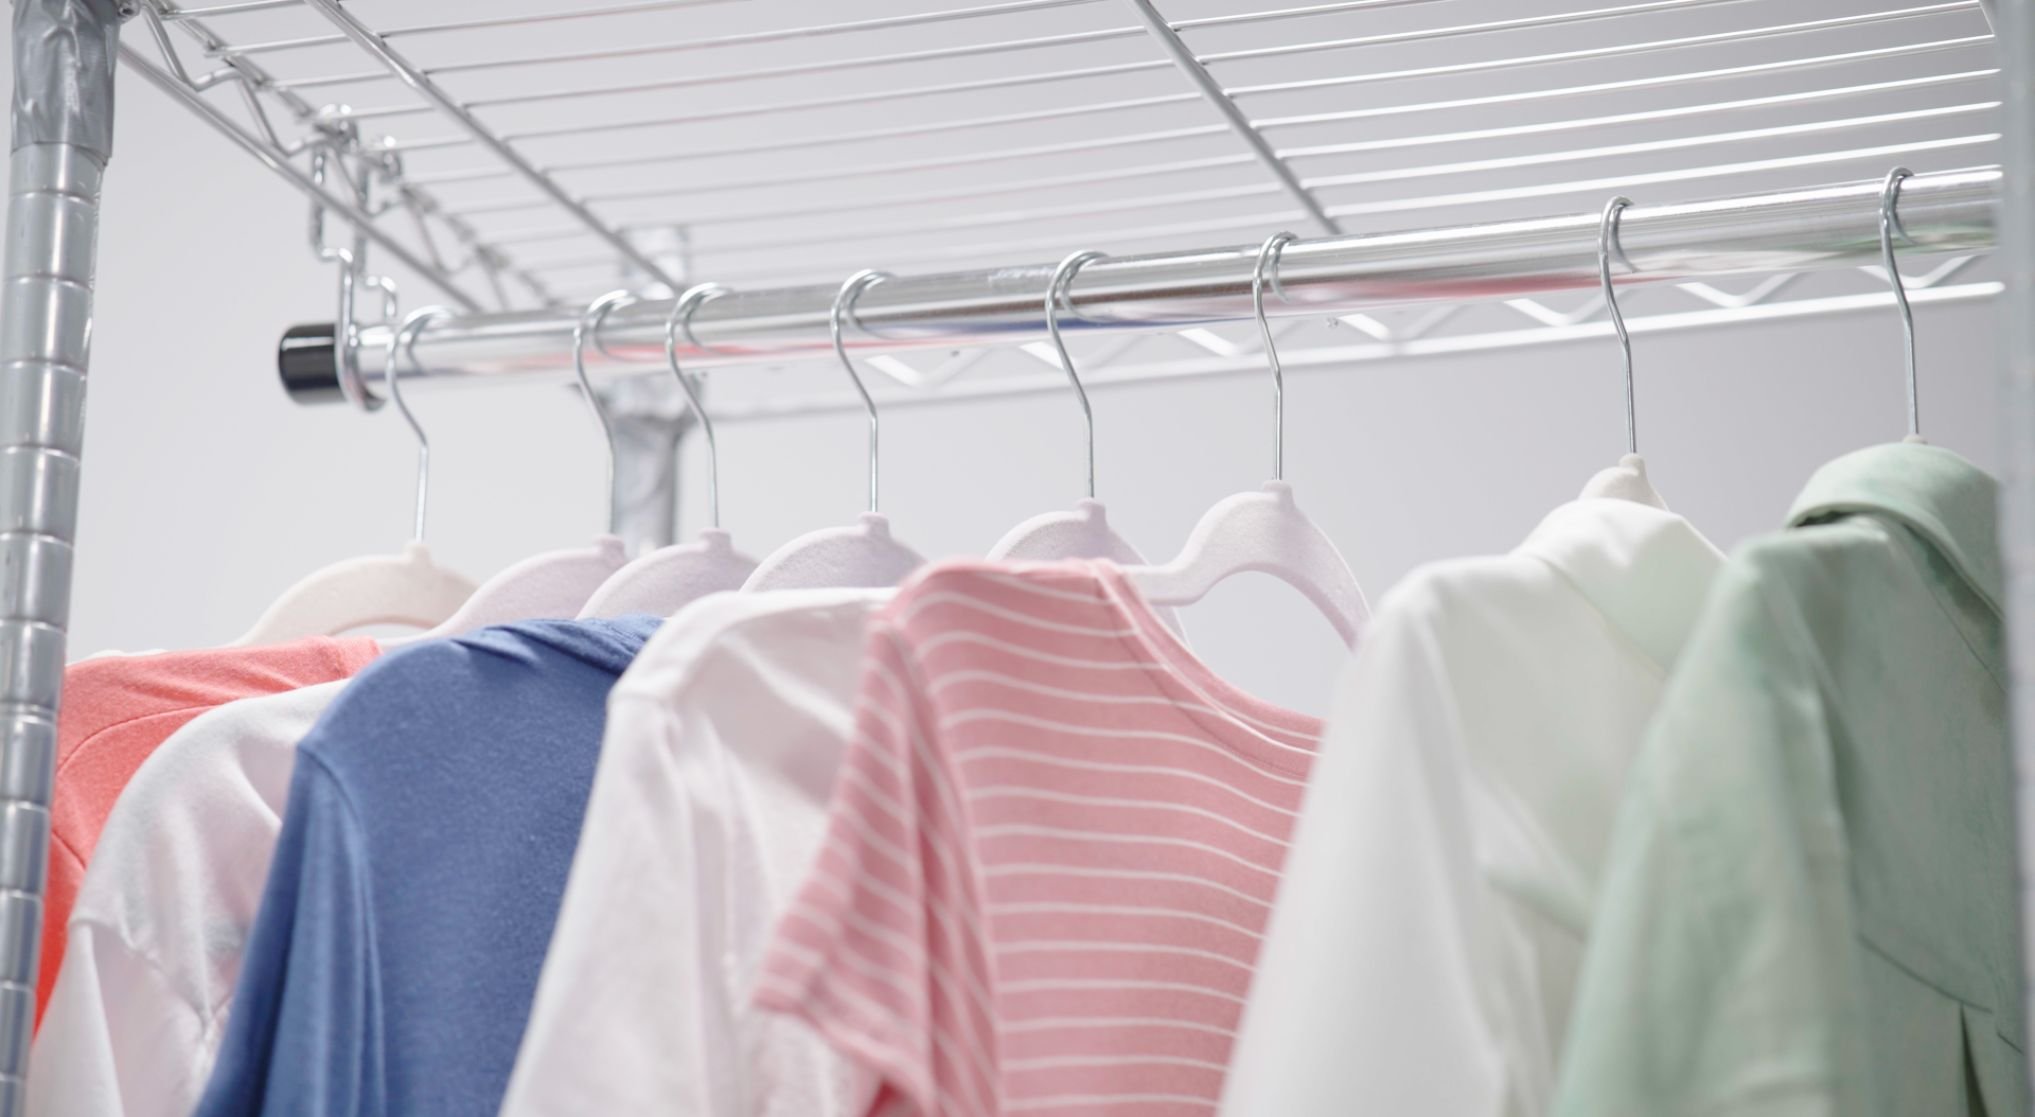 A picture of shirts hanging on a rack